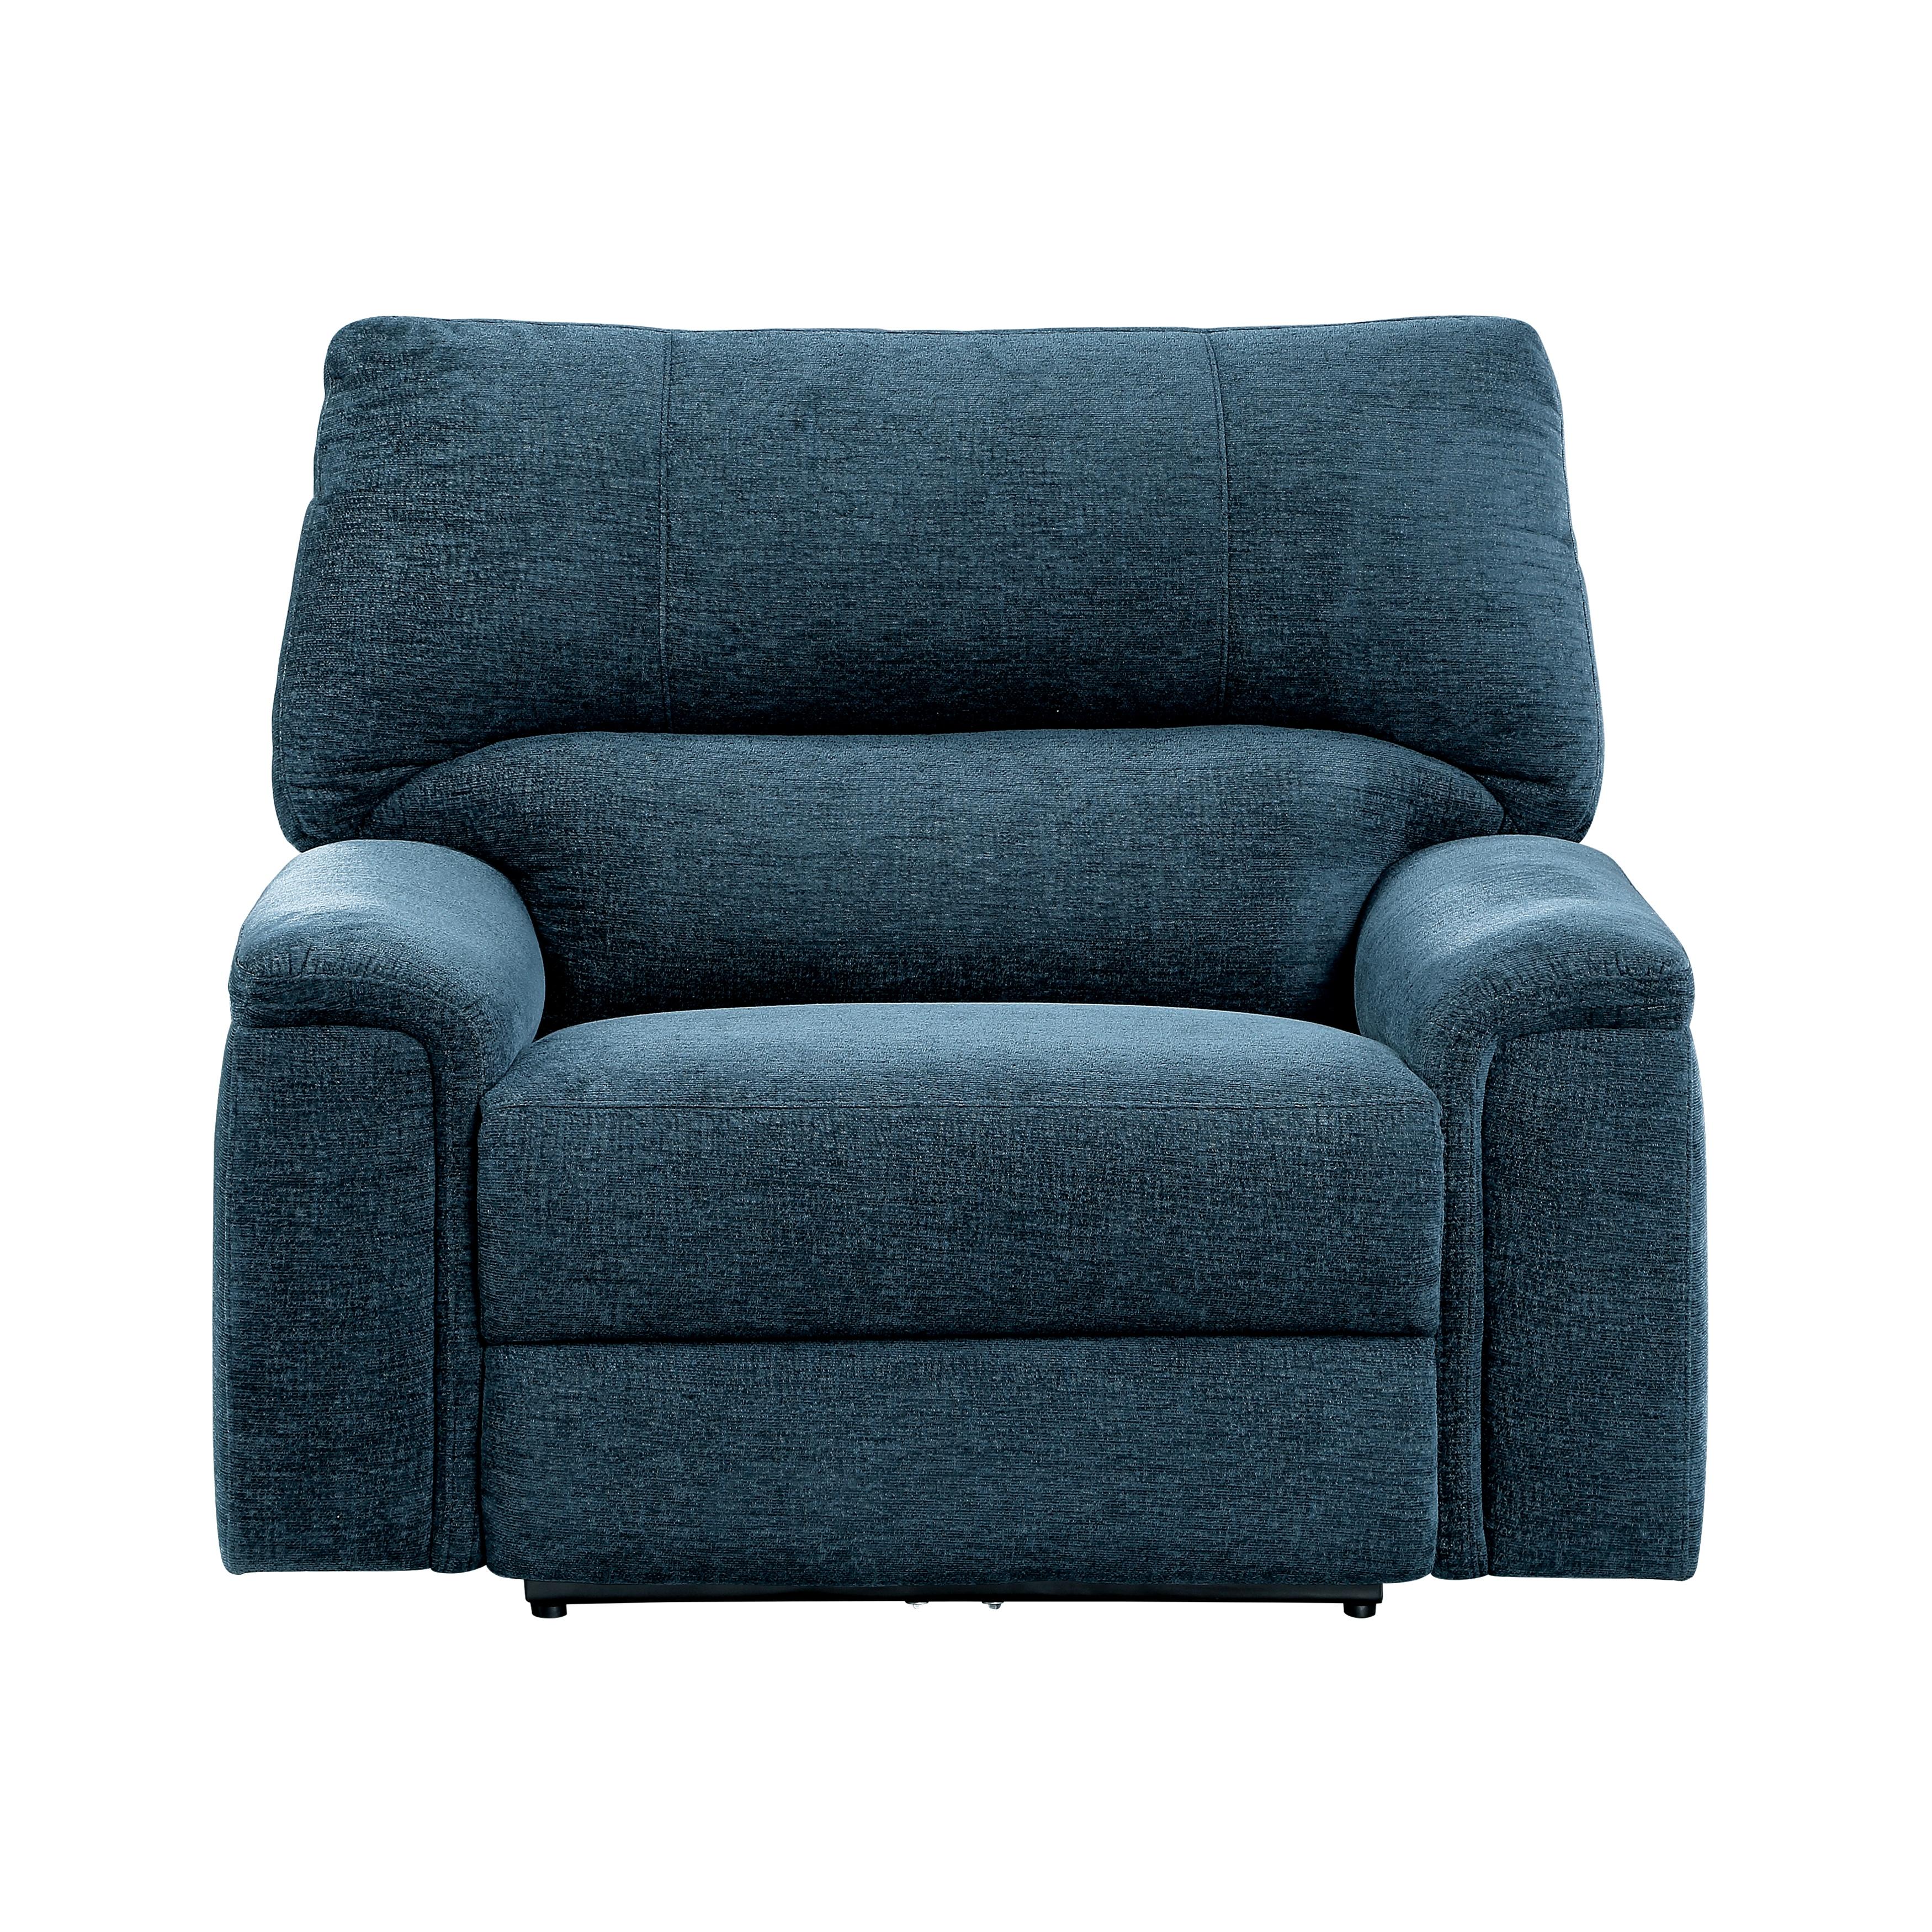 Transitional Power Reclining Chair 9413IN-1PWH Dickinson 9413IN-1PWH in Indigo Chenille